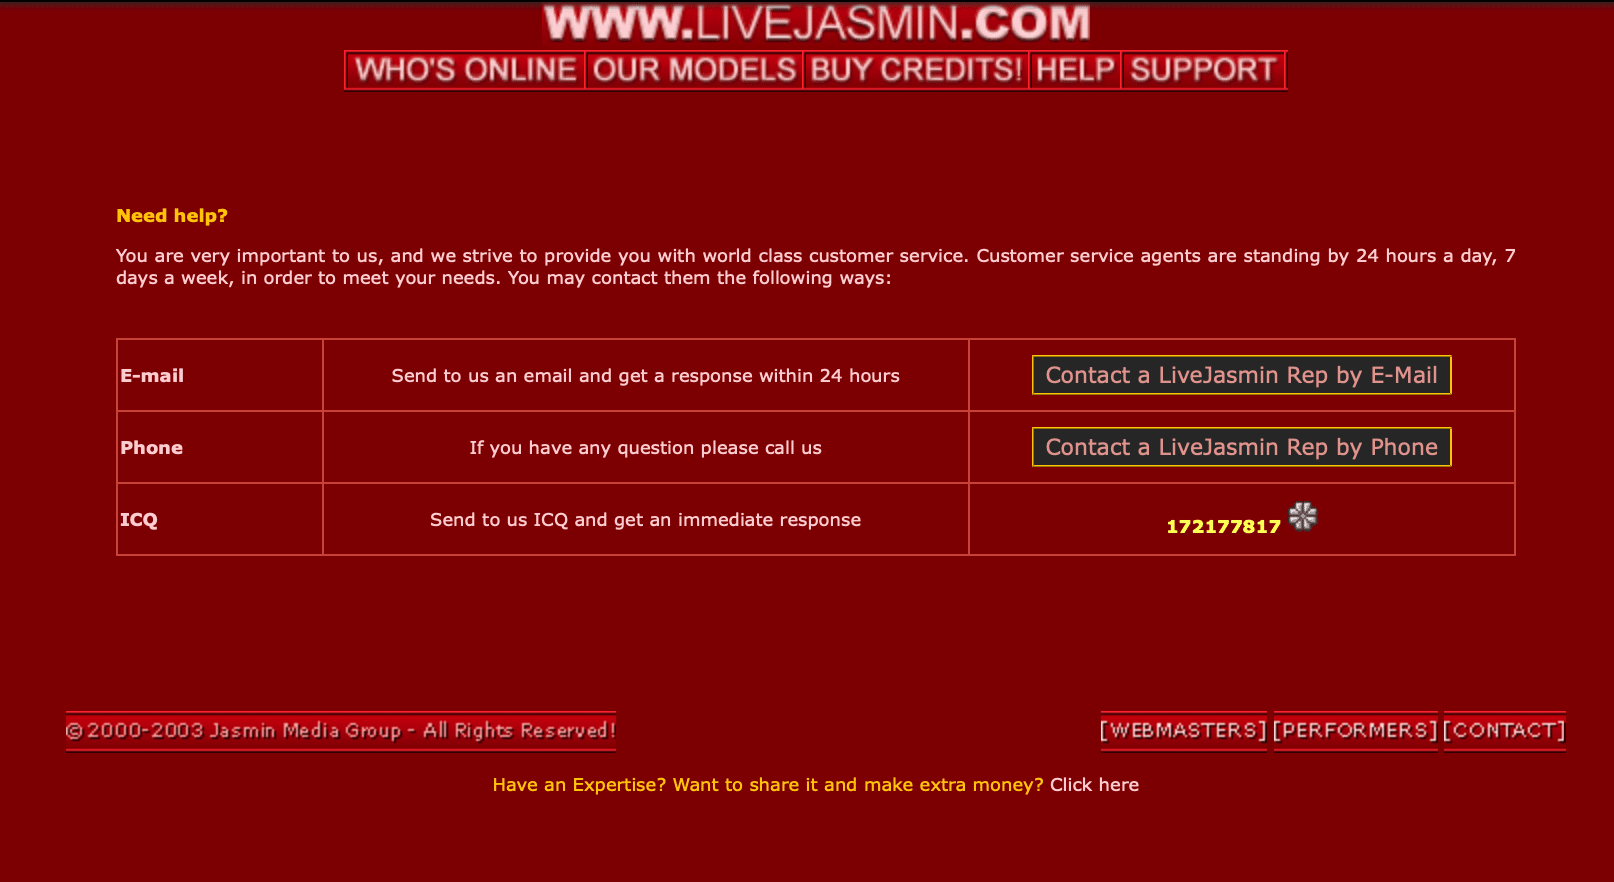 Old version of livejasmin 2003 need help page